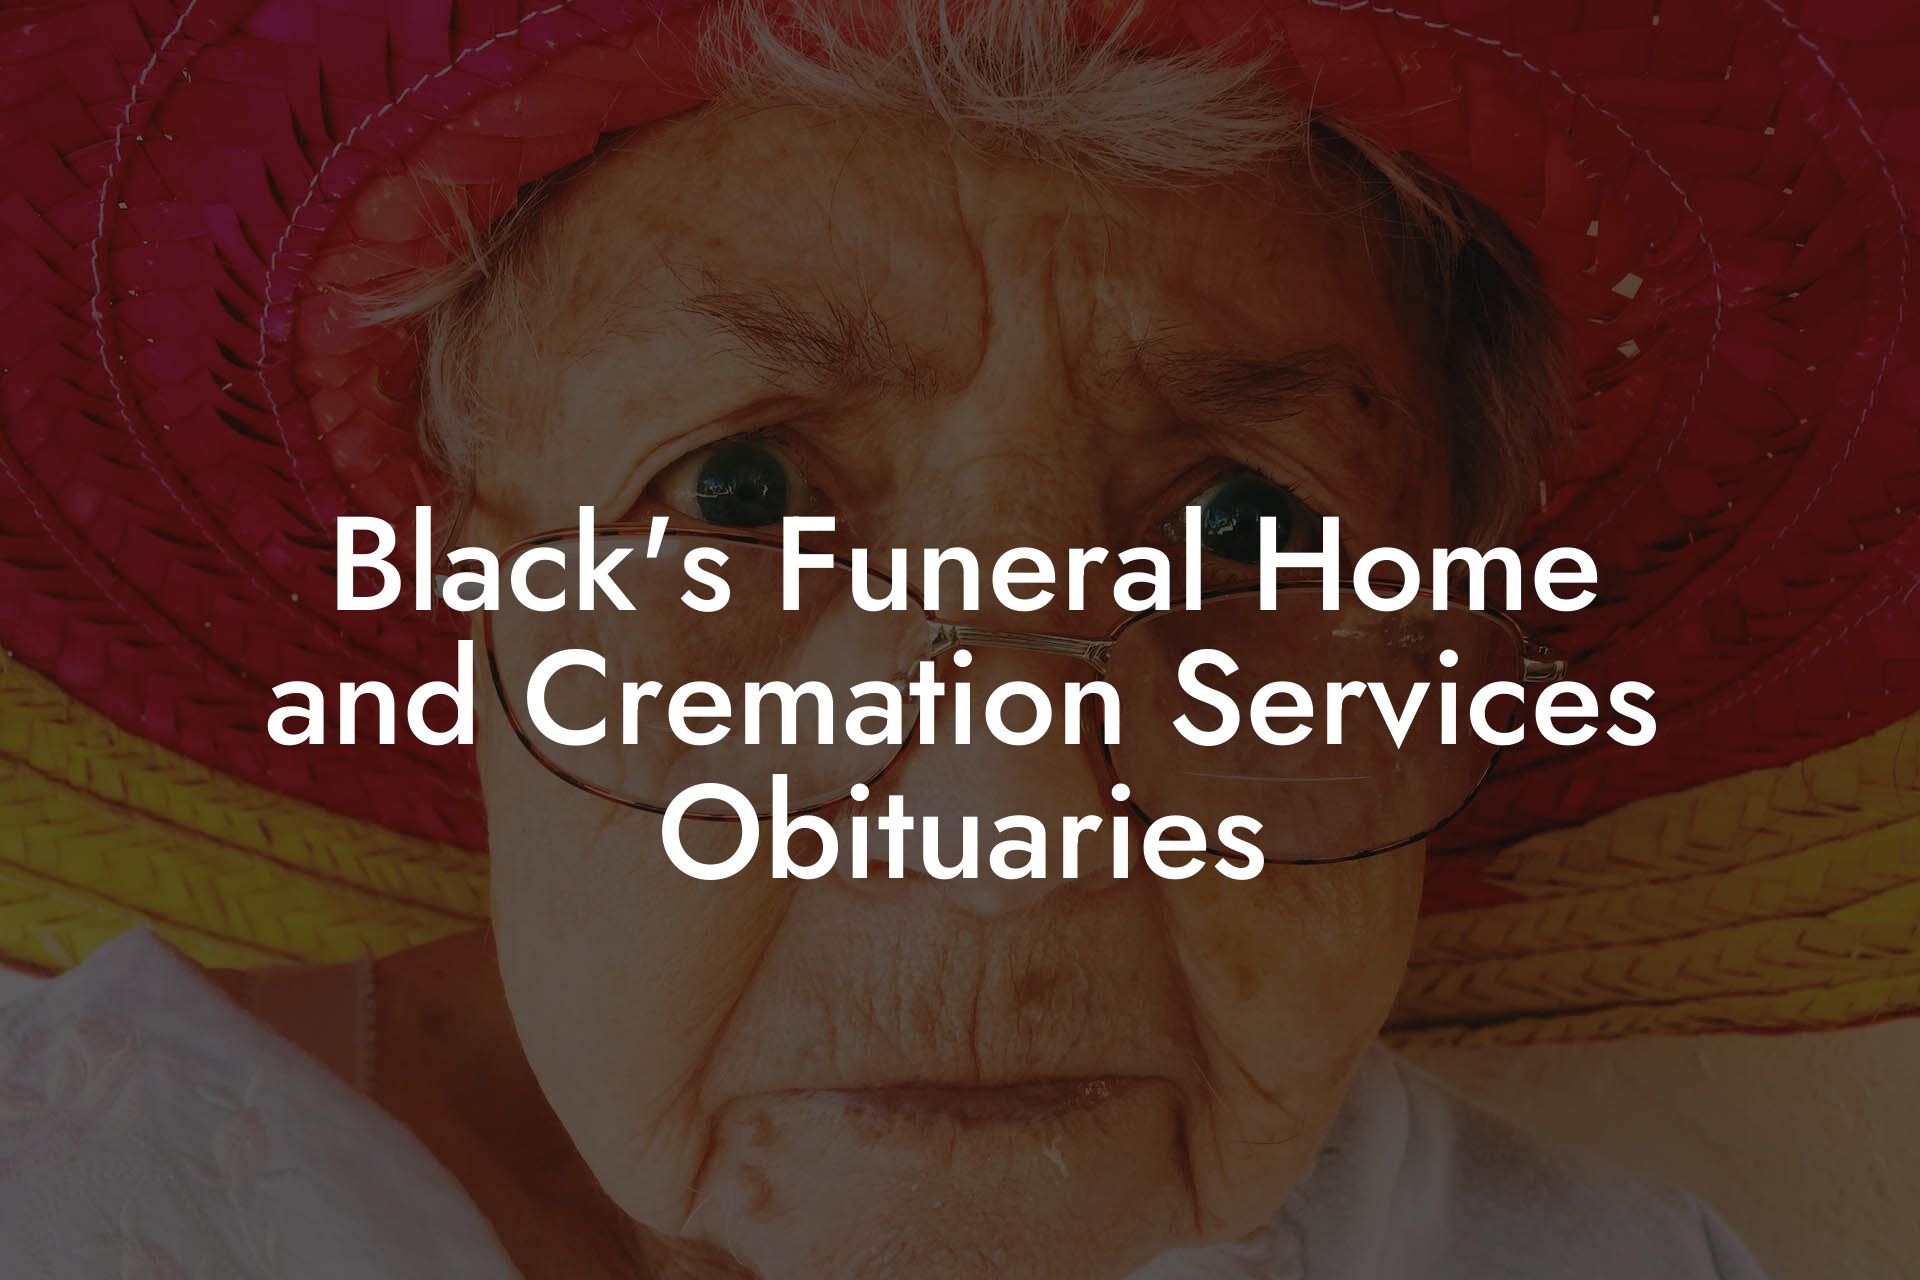 Black's Funeral Home and Cremation Services Obituaries